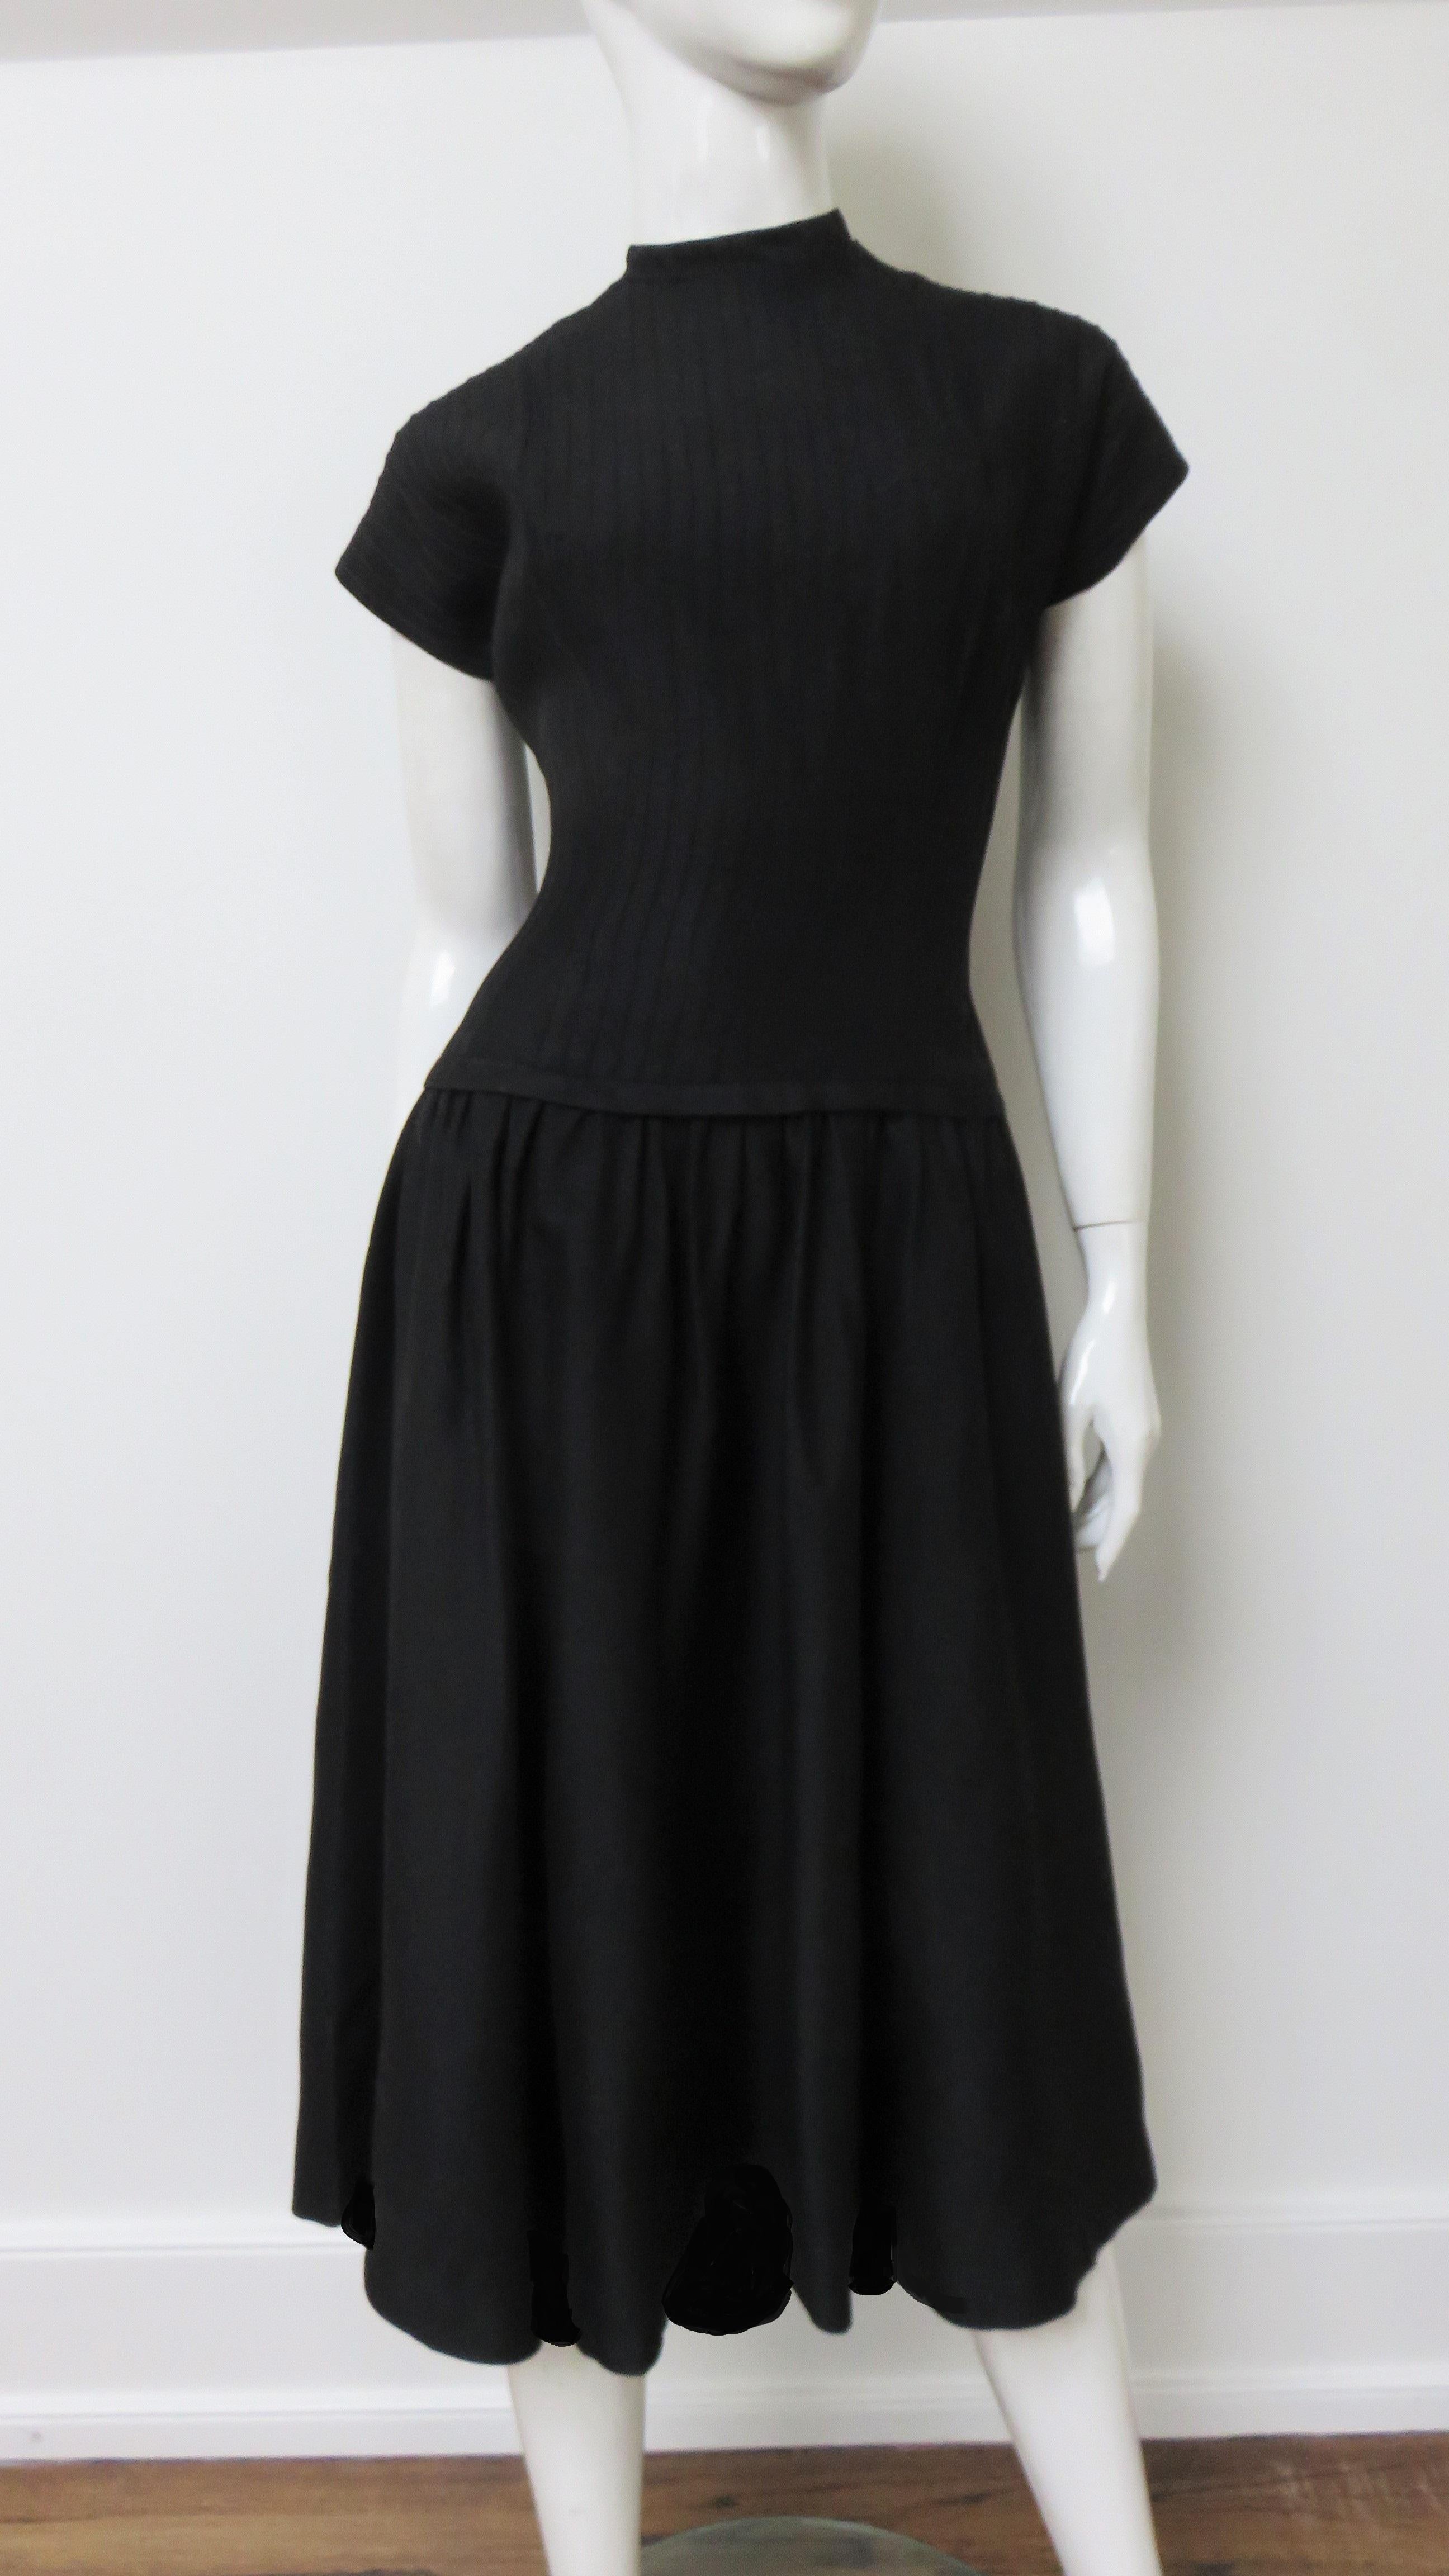 A great black dress by Jane Andre in a cotton linen blend. It has cap sleeves, a drop waist and full skirt. There is fine band around the crew neckline and the drop waistline ending in a small bow at the back of each. The bodice is finely ribbed and